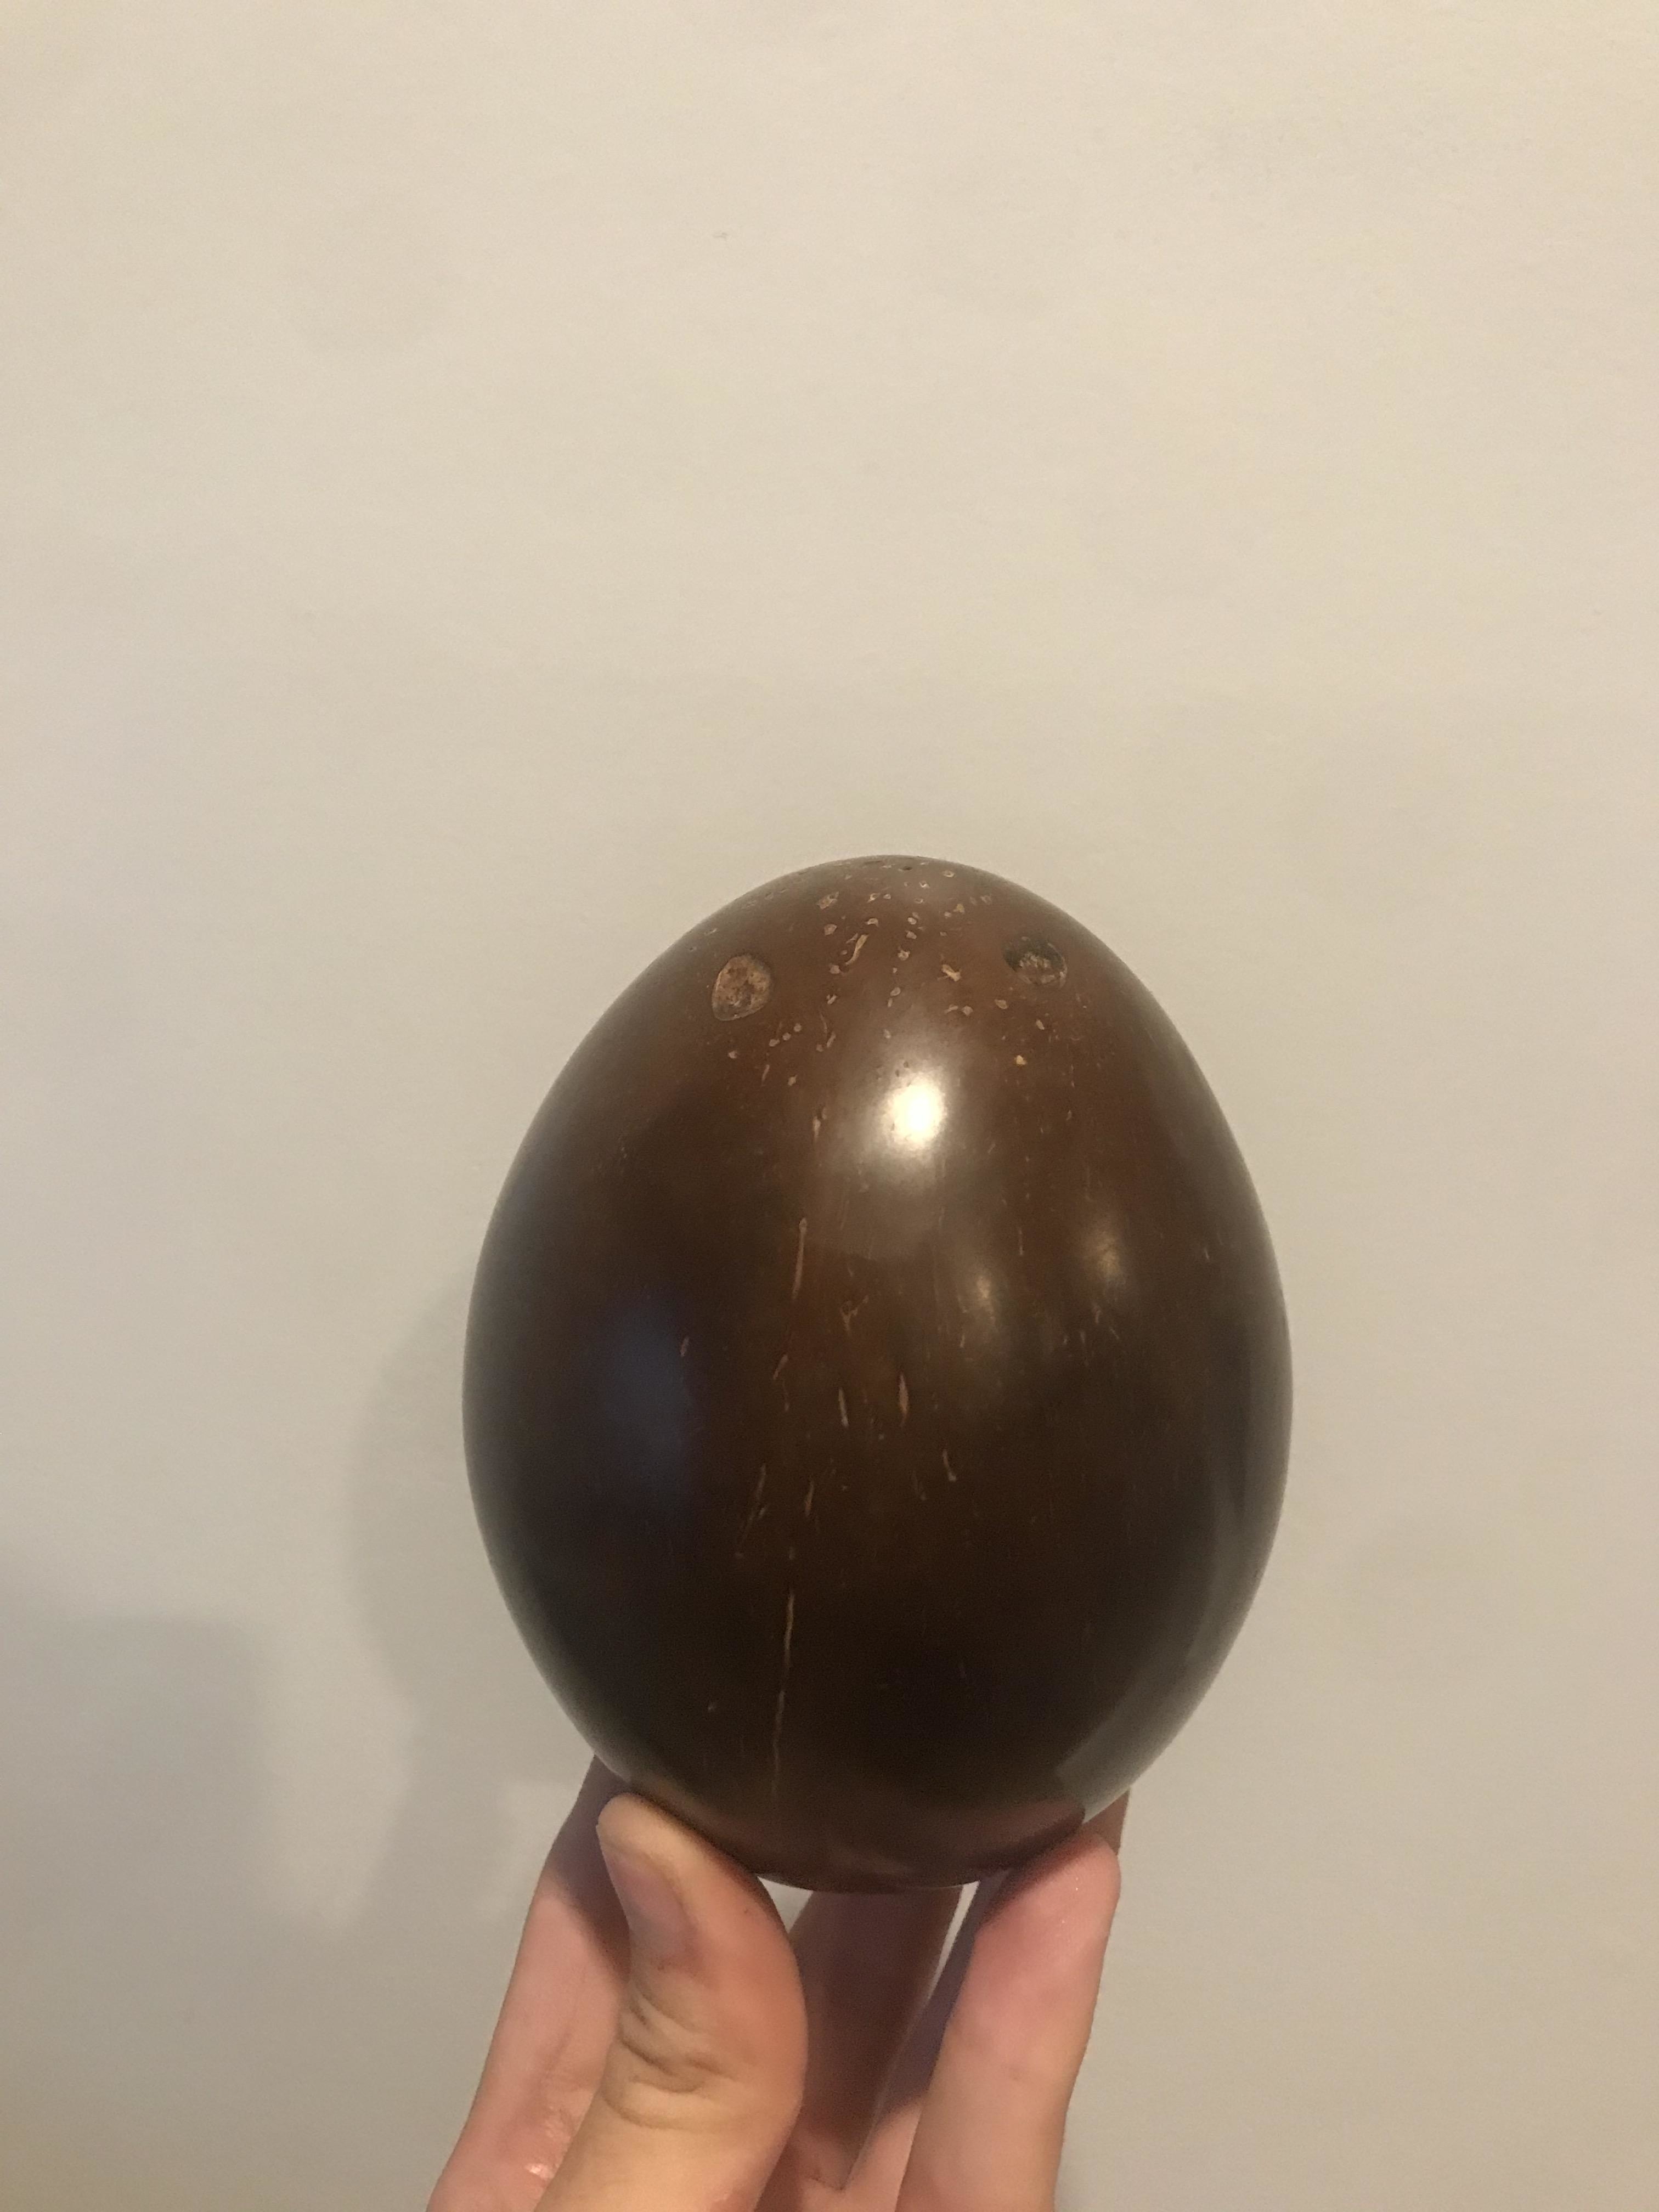 A brown egg-shaped object